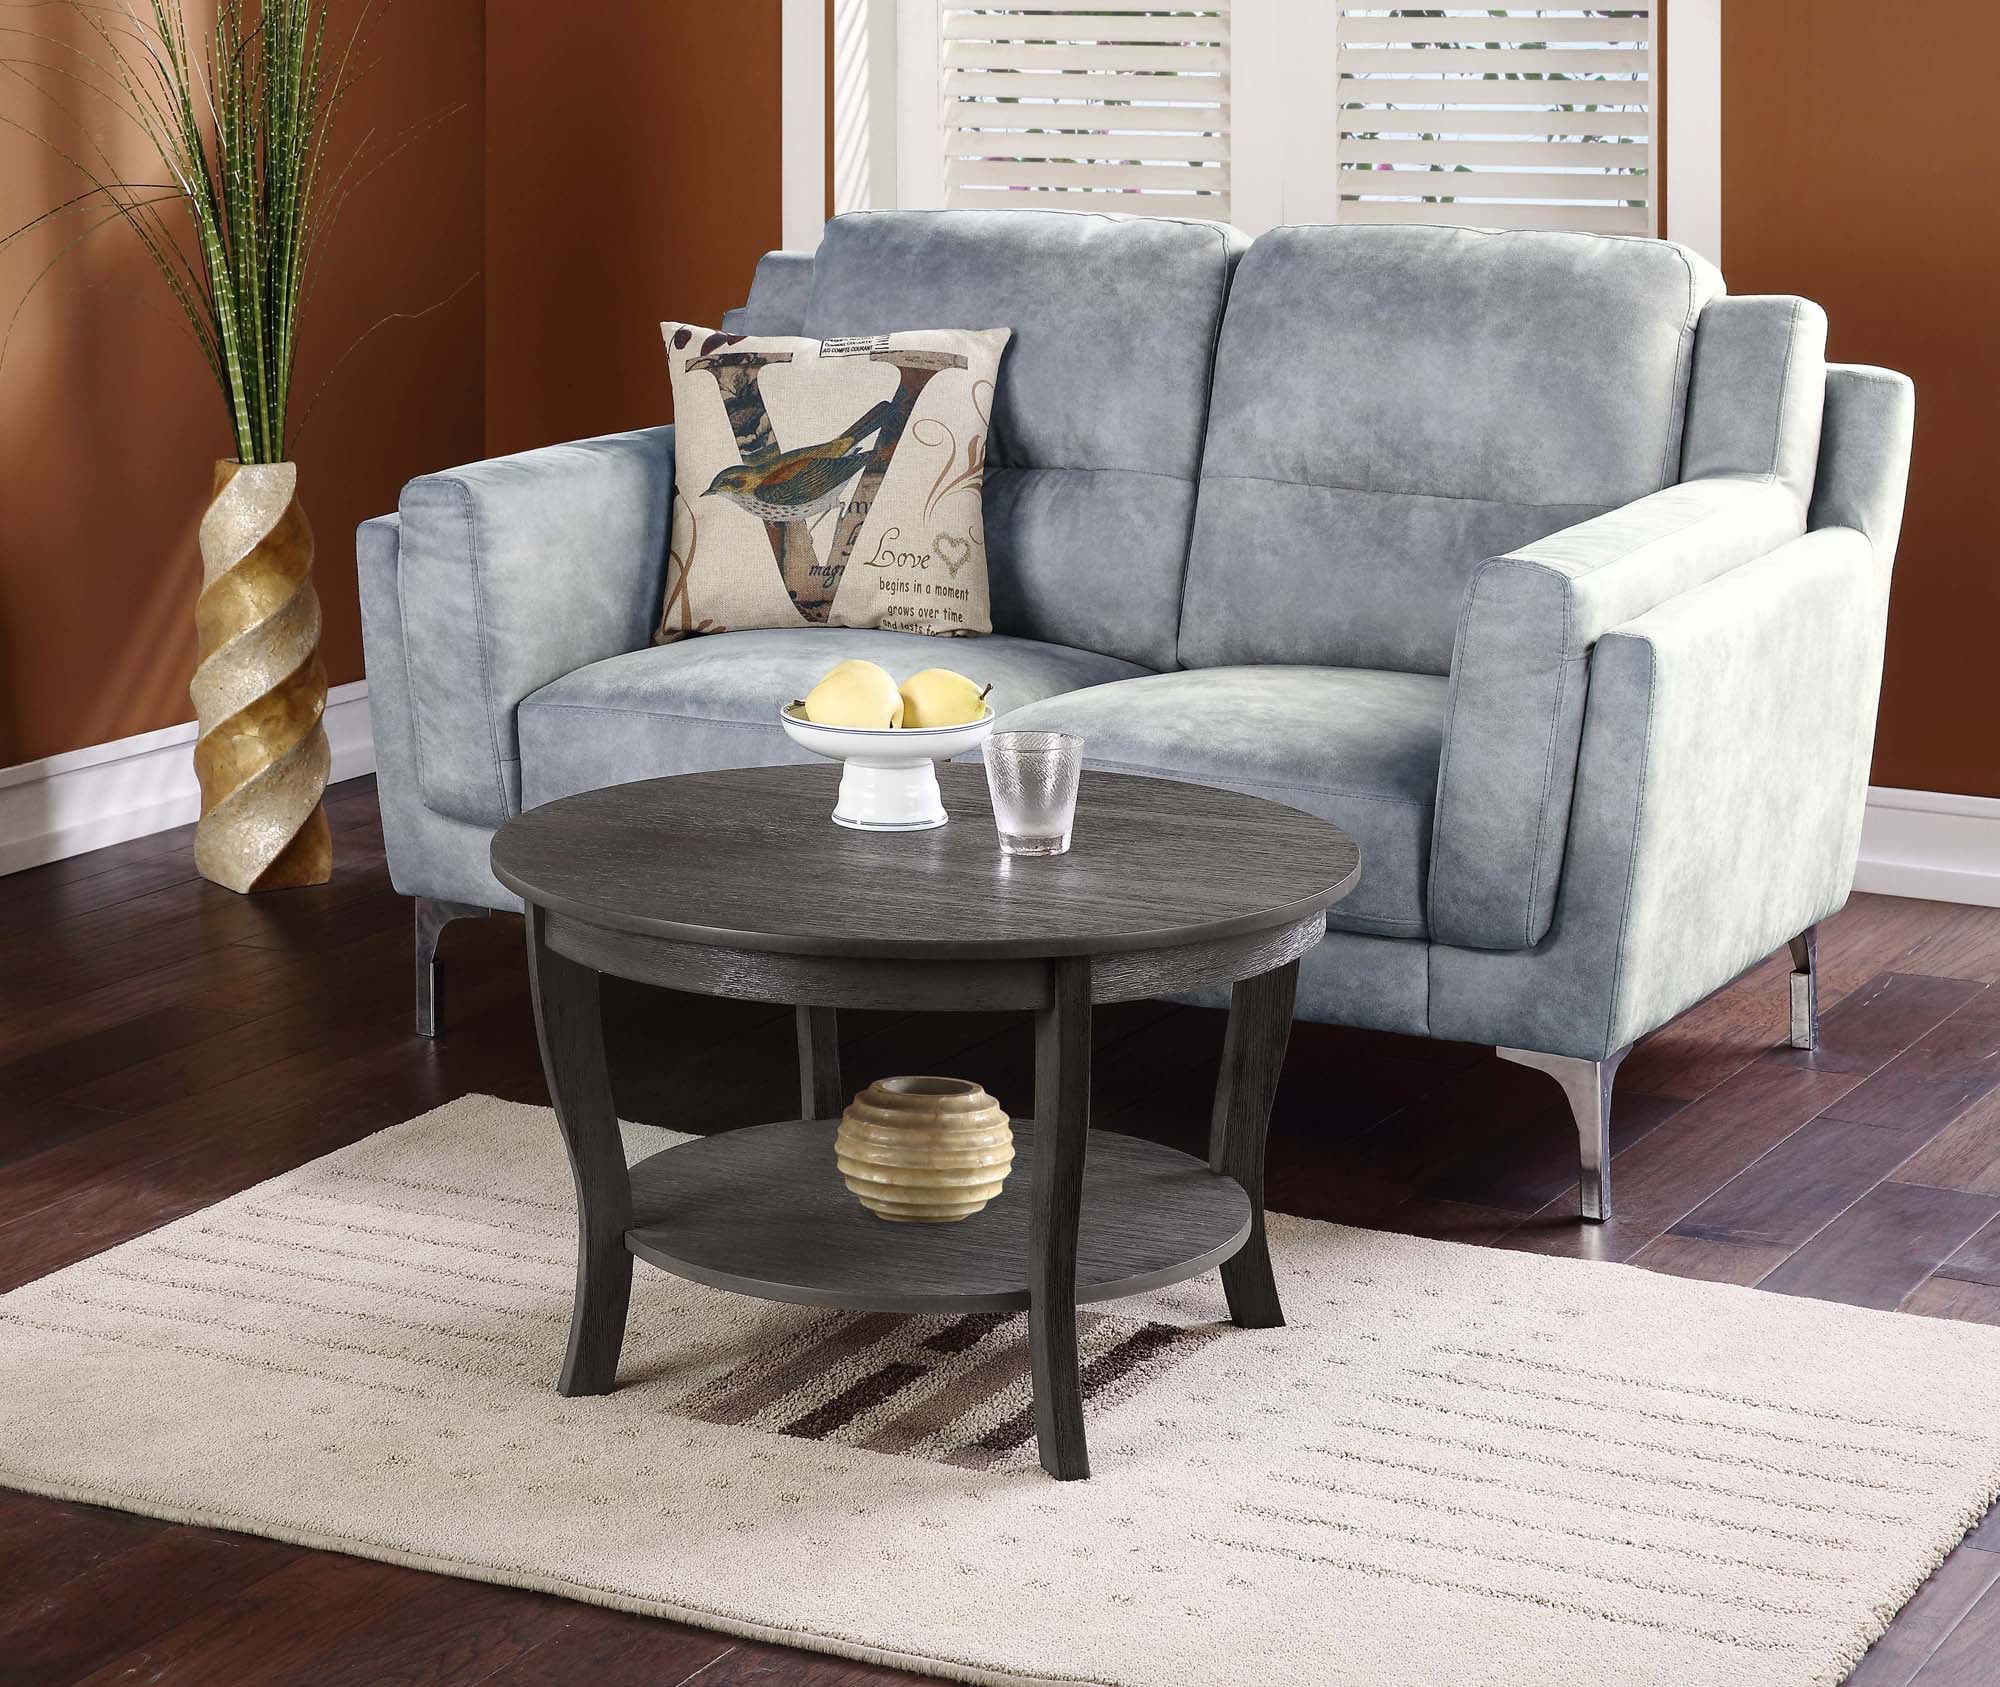 Convenience Concepts American Heritage Round Coffee Table – Walmart Inside American Heritage Round Coffee Tables (Gallery 1 of 20)